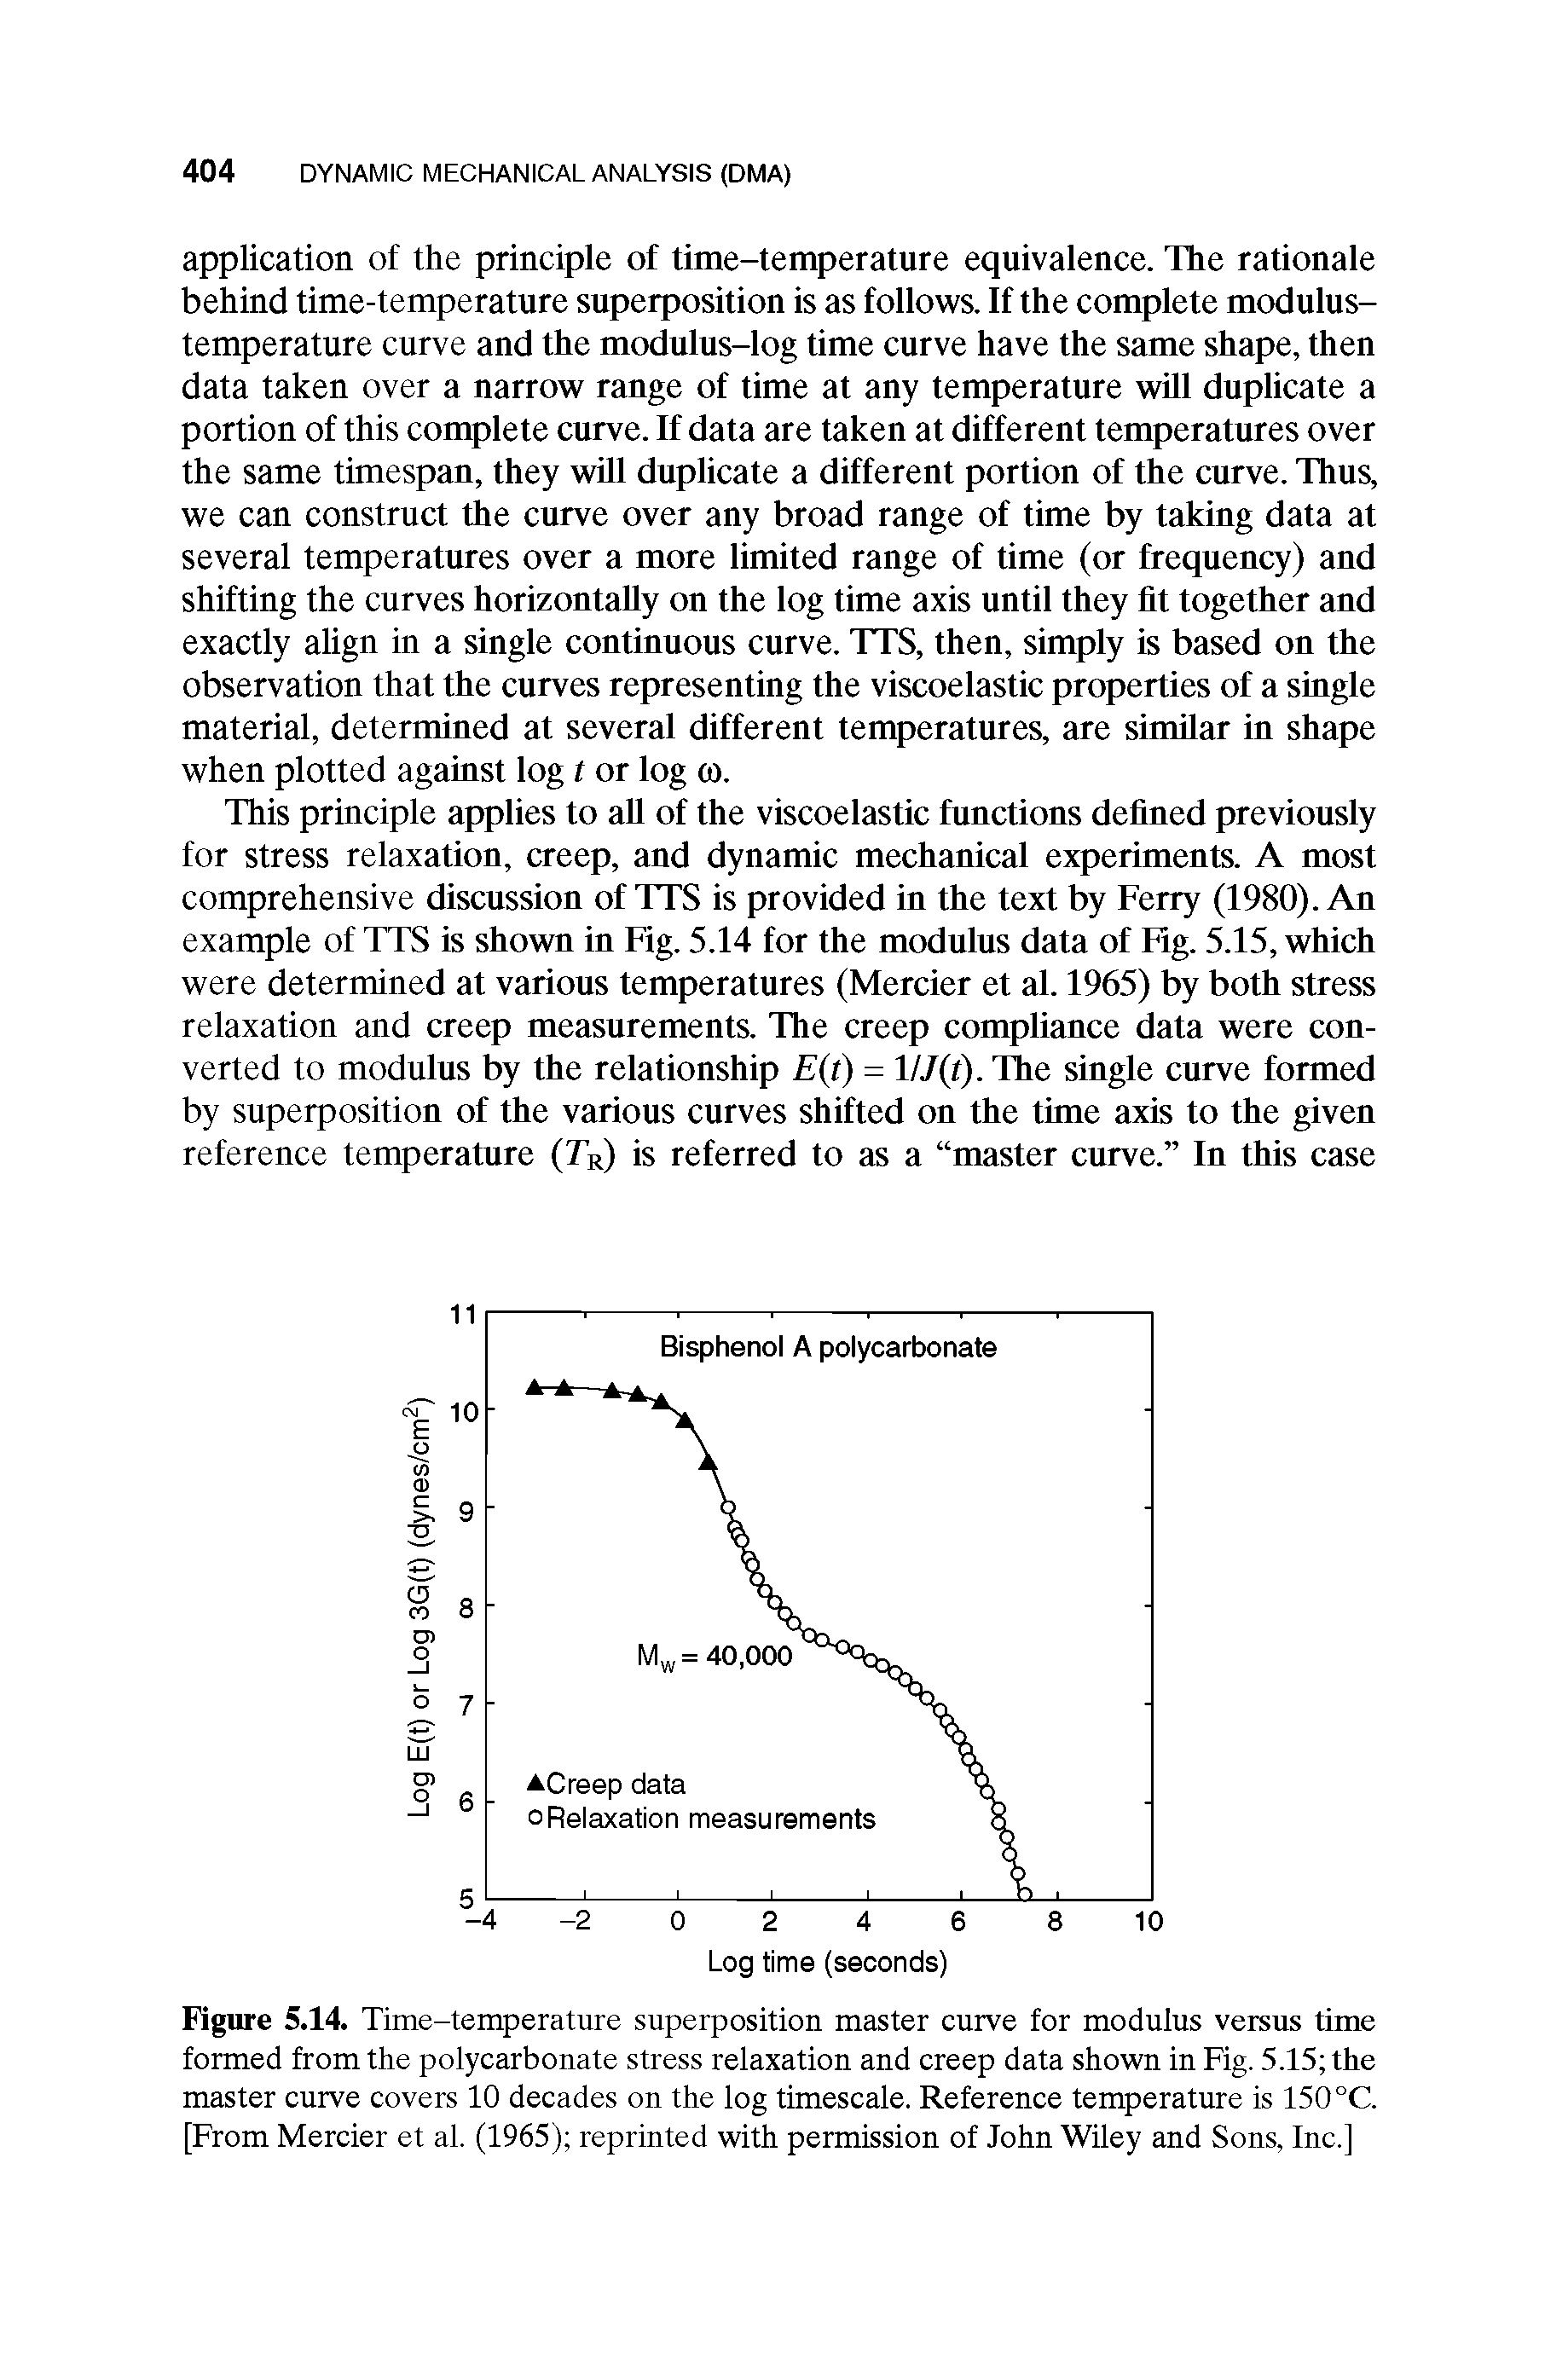 Figure 5.14. Time-temperature superposition master curve for modulus versus time formed from the polycarbonate stress relaxation and creep data shown in Fig. 5.15 the master curve covers 10 decades on the log timescale. Reference temperature is 150 °C. [From Mercier et al. (1965) reprinted with permission of John Wiley and Sons, Inc.]...